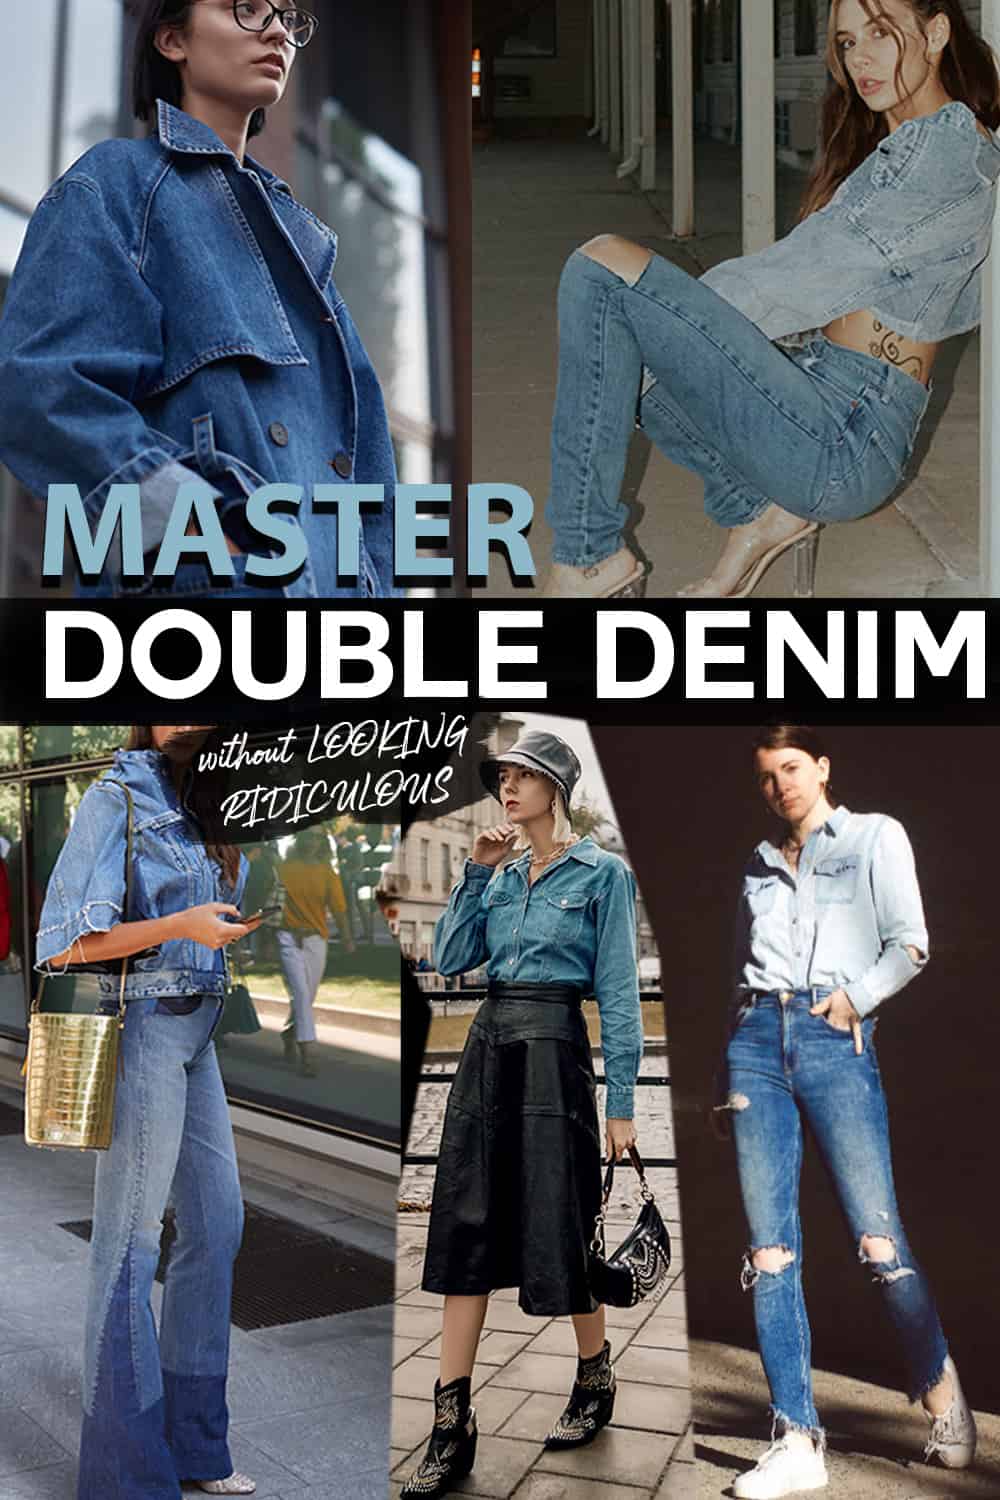 master double denim witout looking ridiculous. fashion images of double denim- denim coat outfit, denim jacket with fitted blue jeans, denim cropped jacket with flares, double denim with jeans and shirt, denim shirt with skirt 